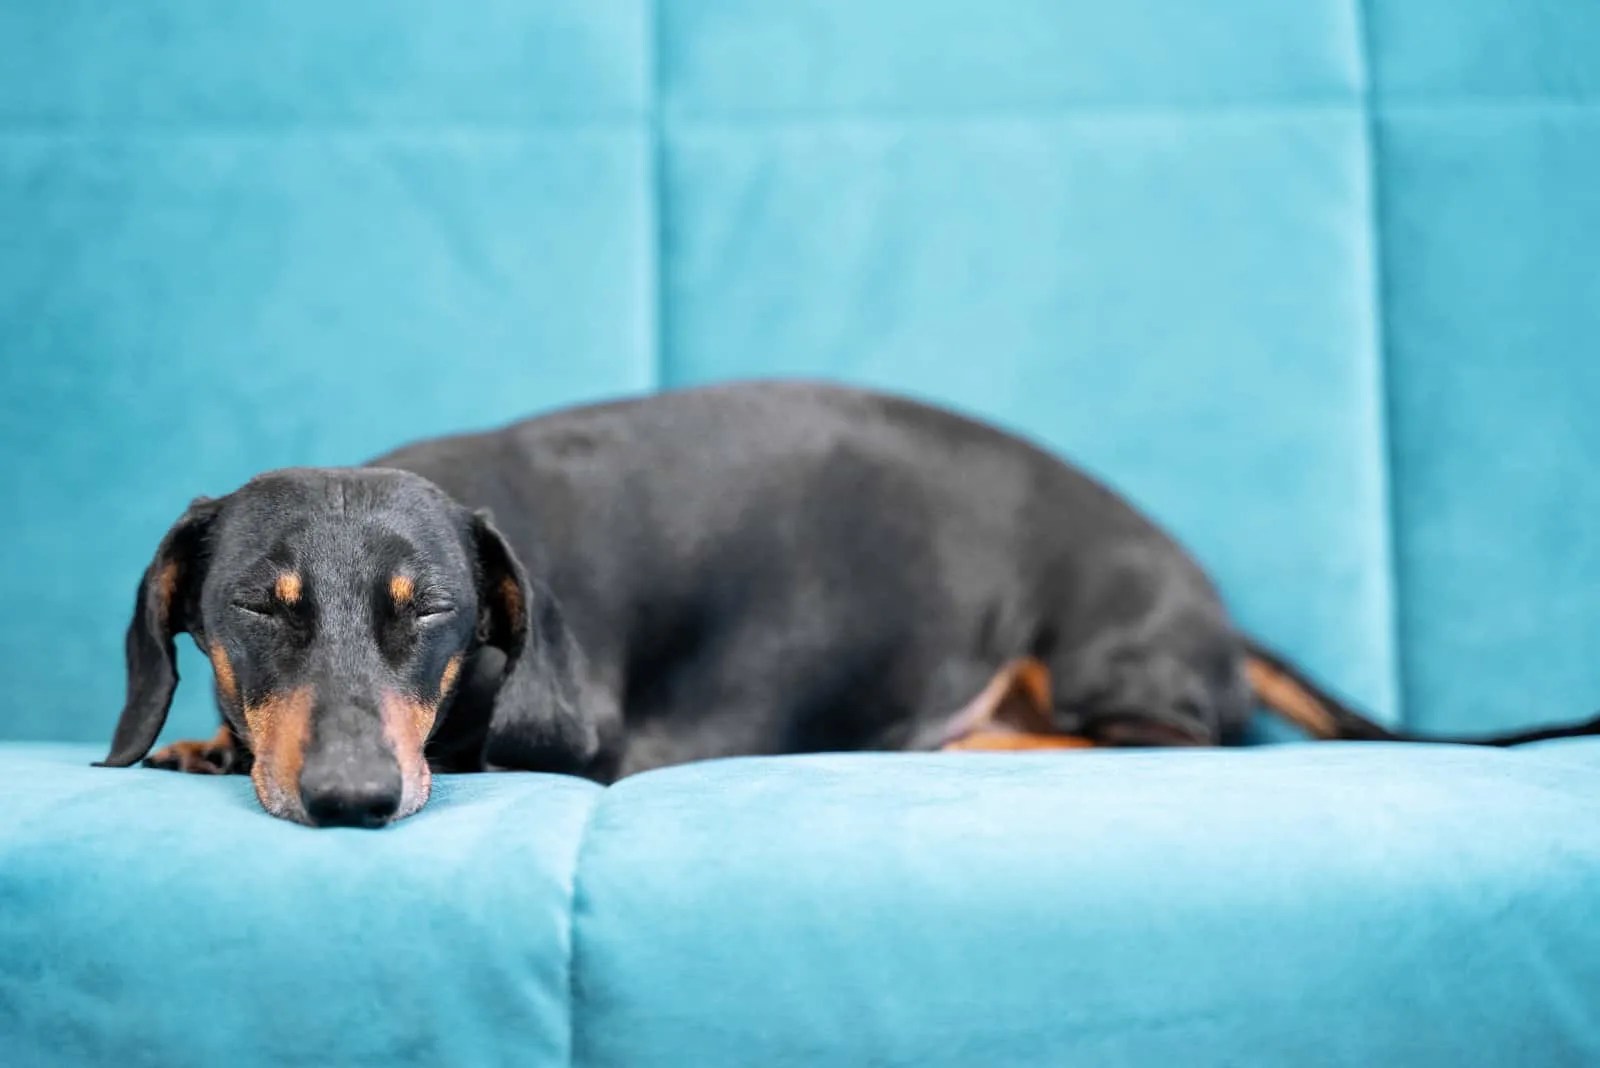 How Much Do Dachshunds Shed? Grooming And Care Overview